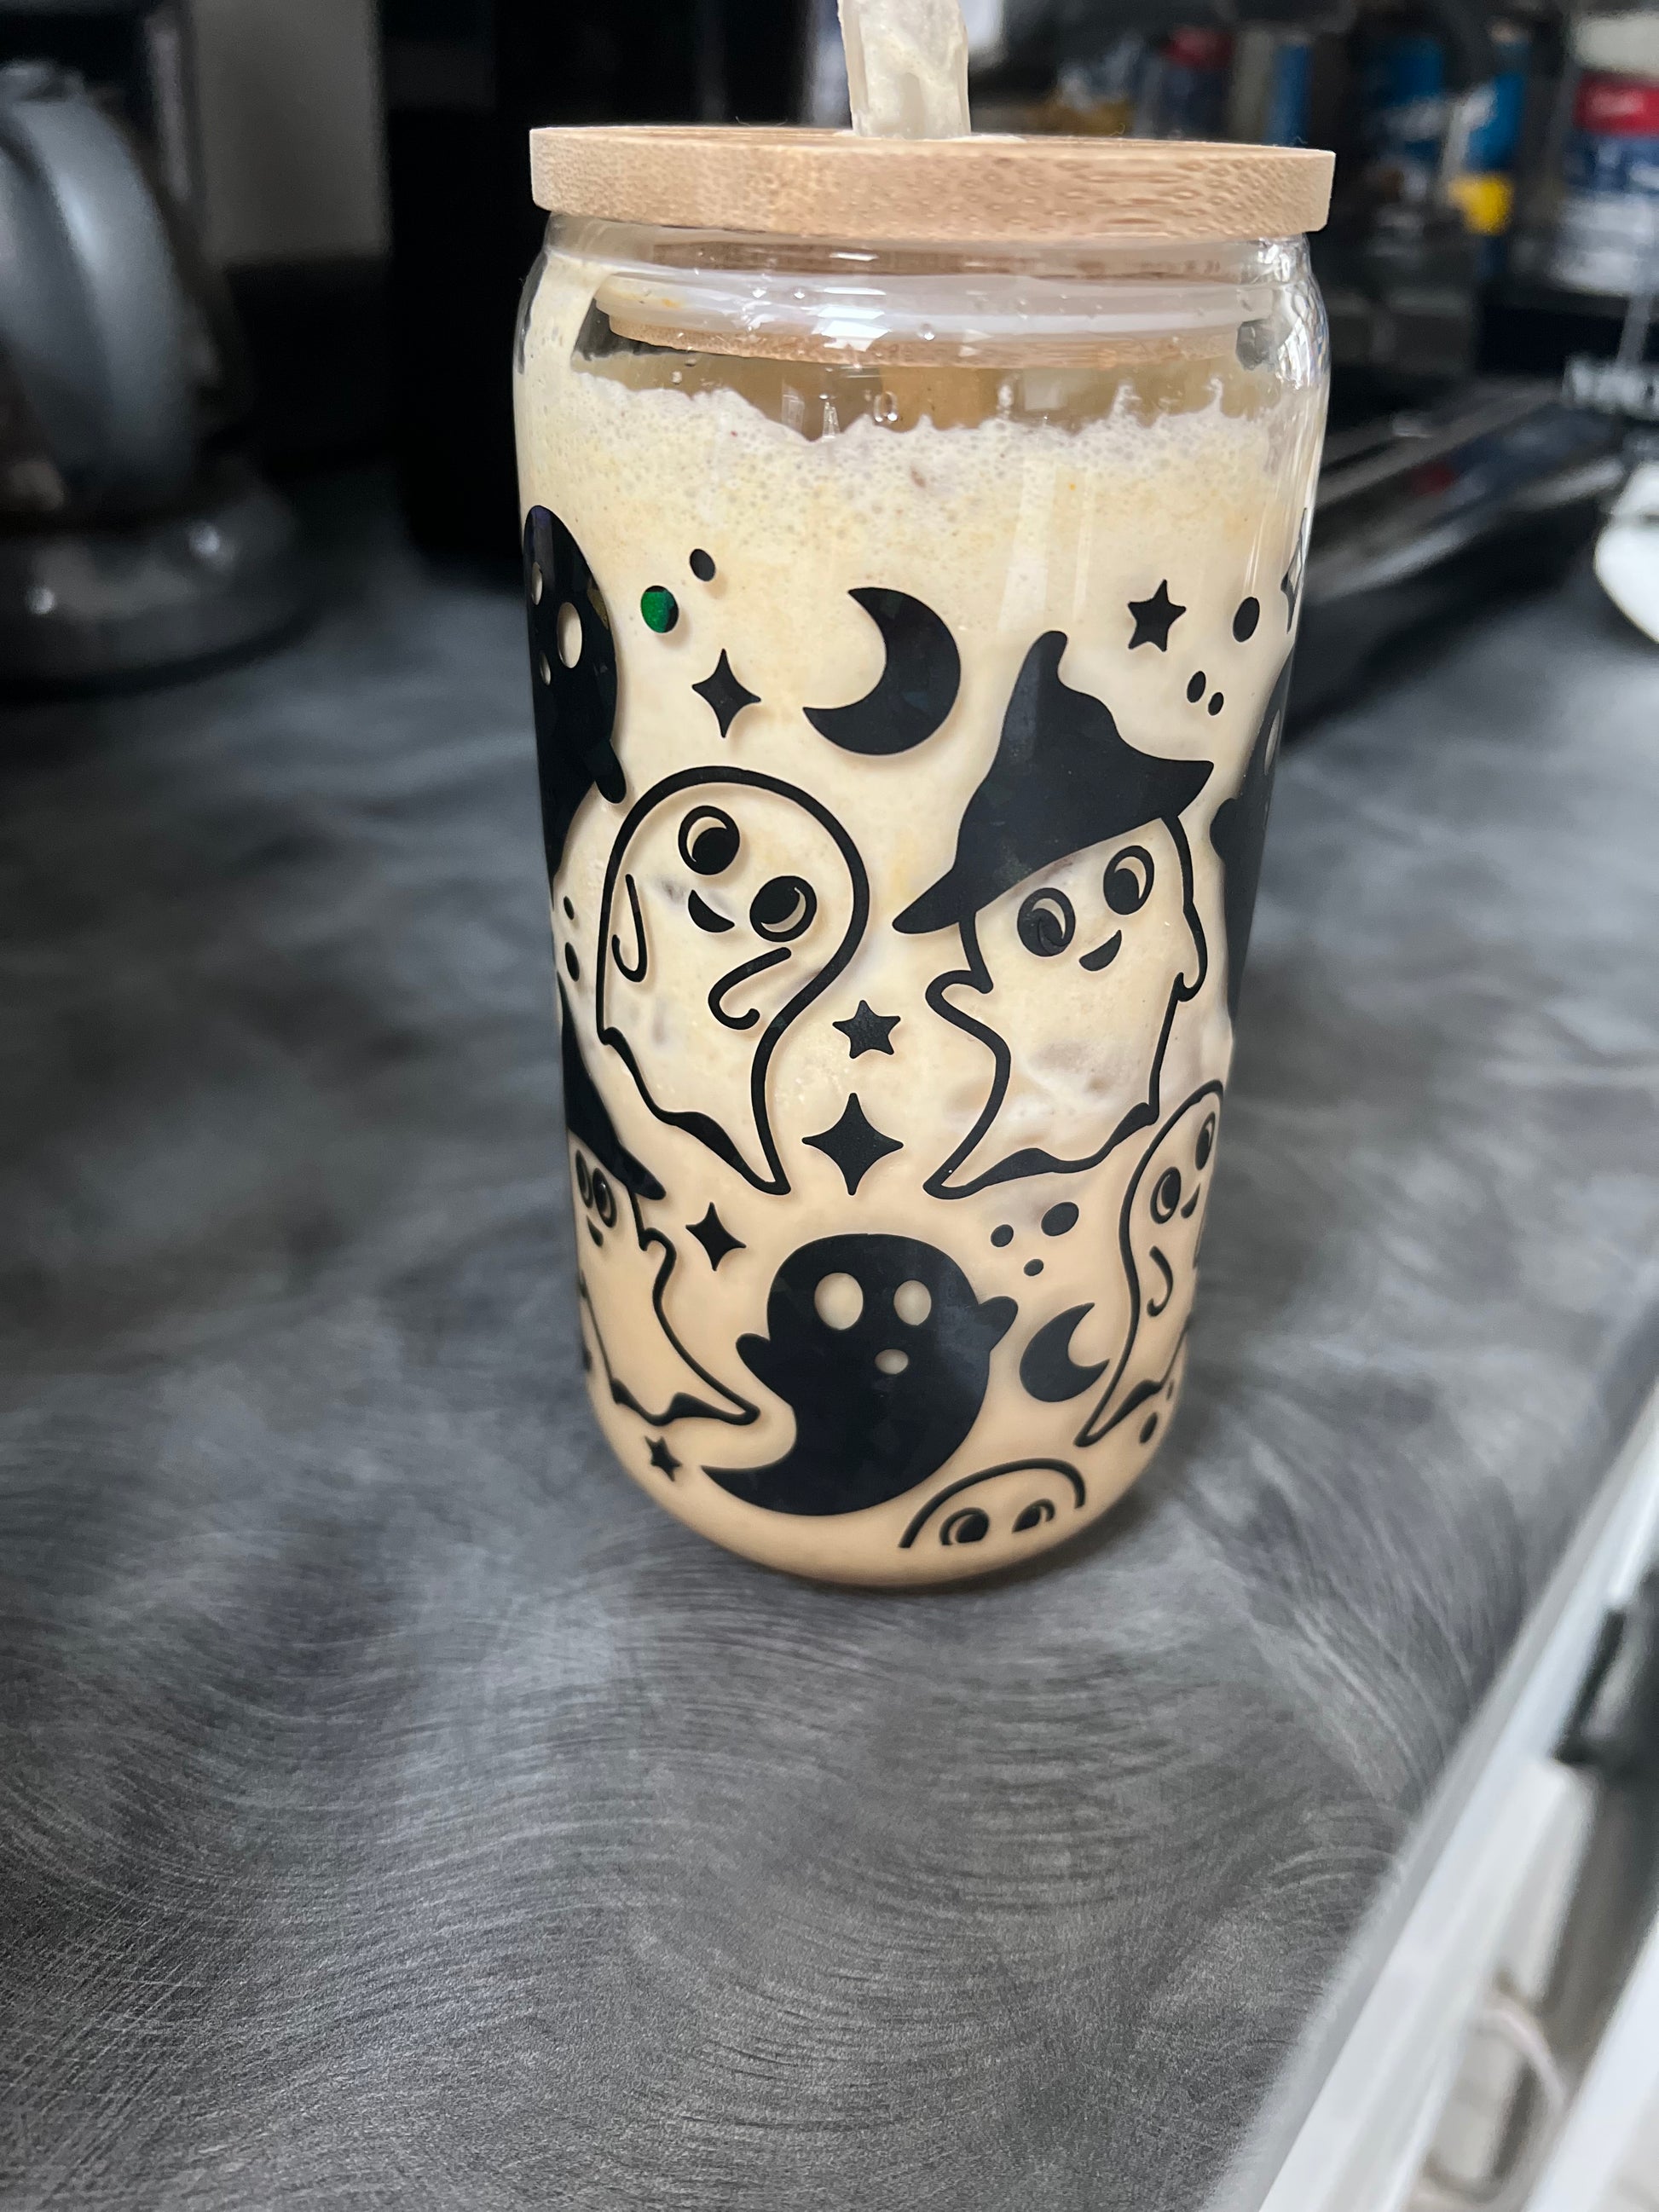 Just added this spooky glass cup to our tik tok shop. Check out our Ha